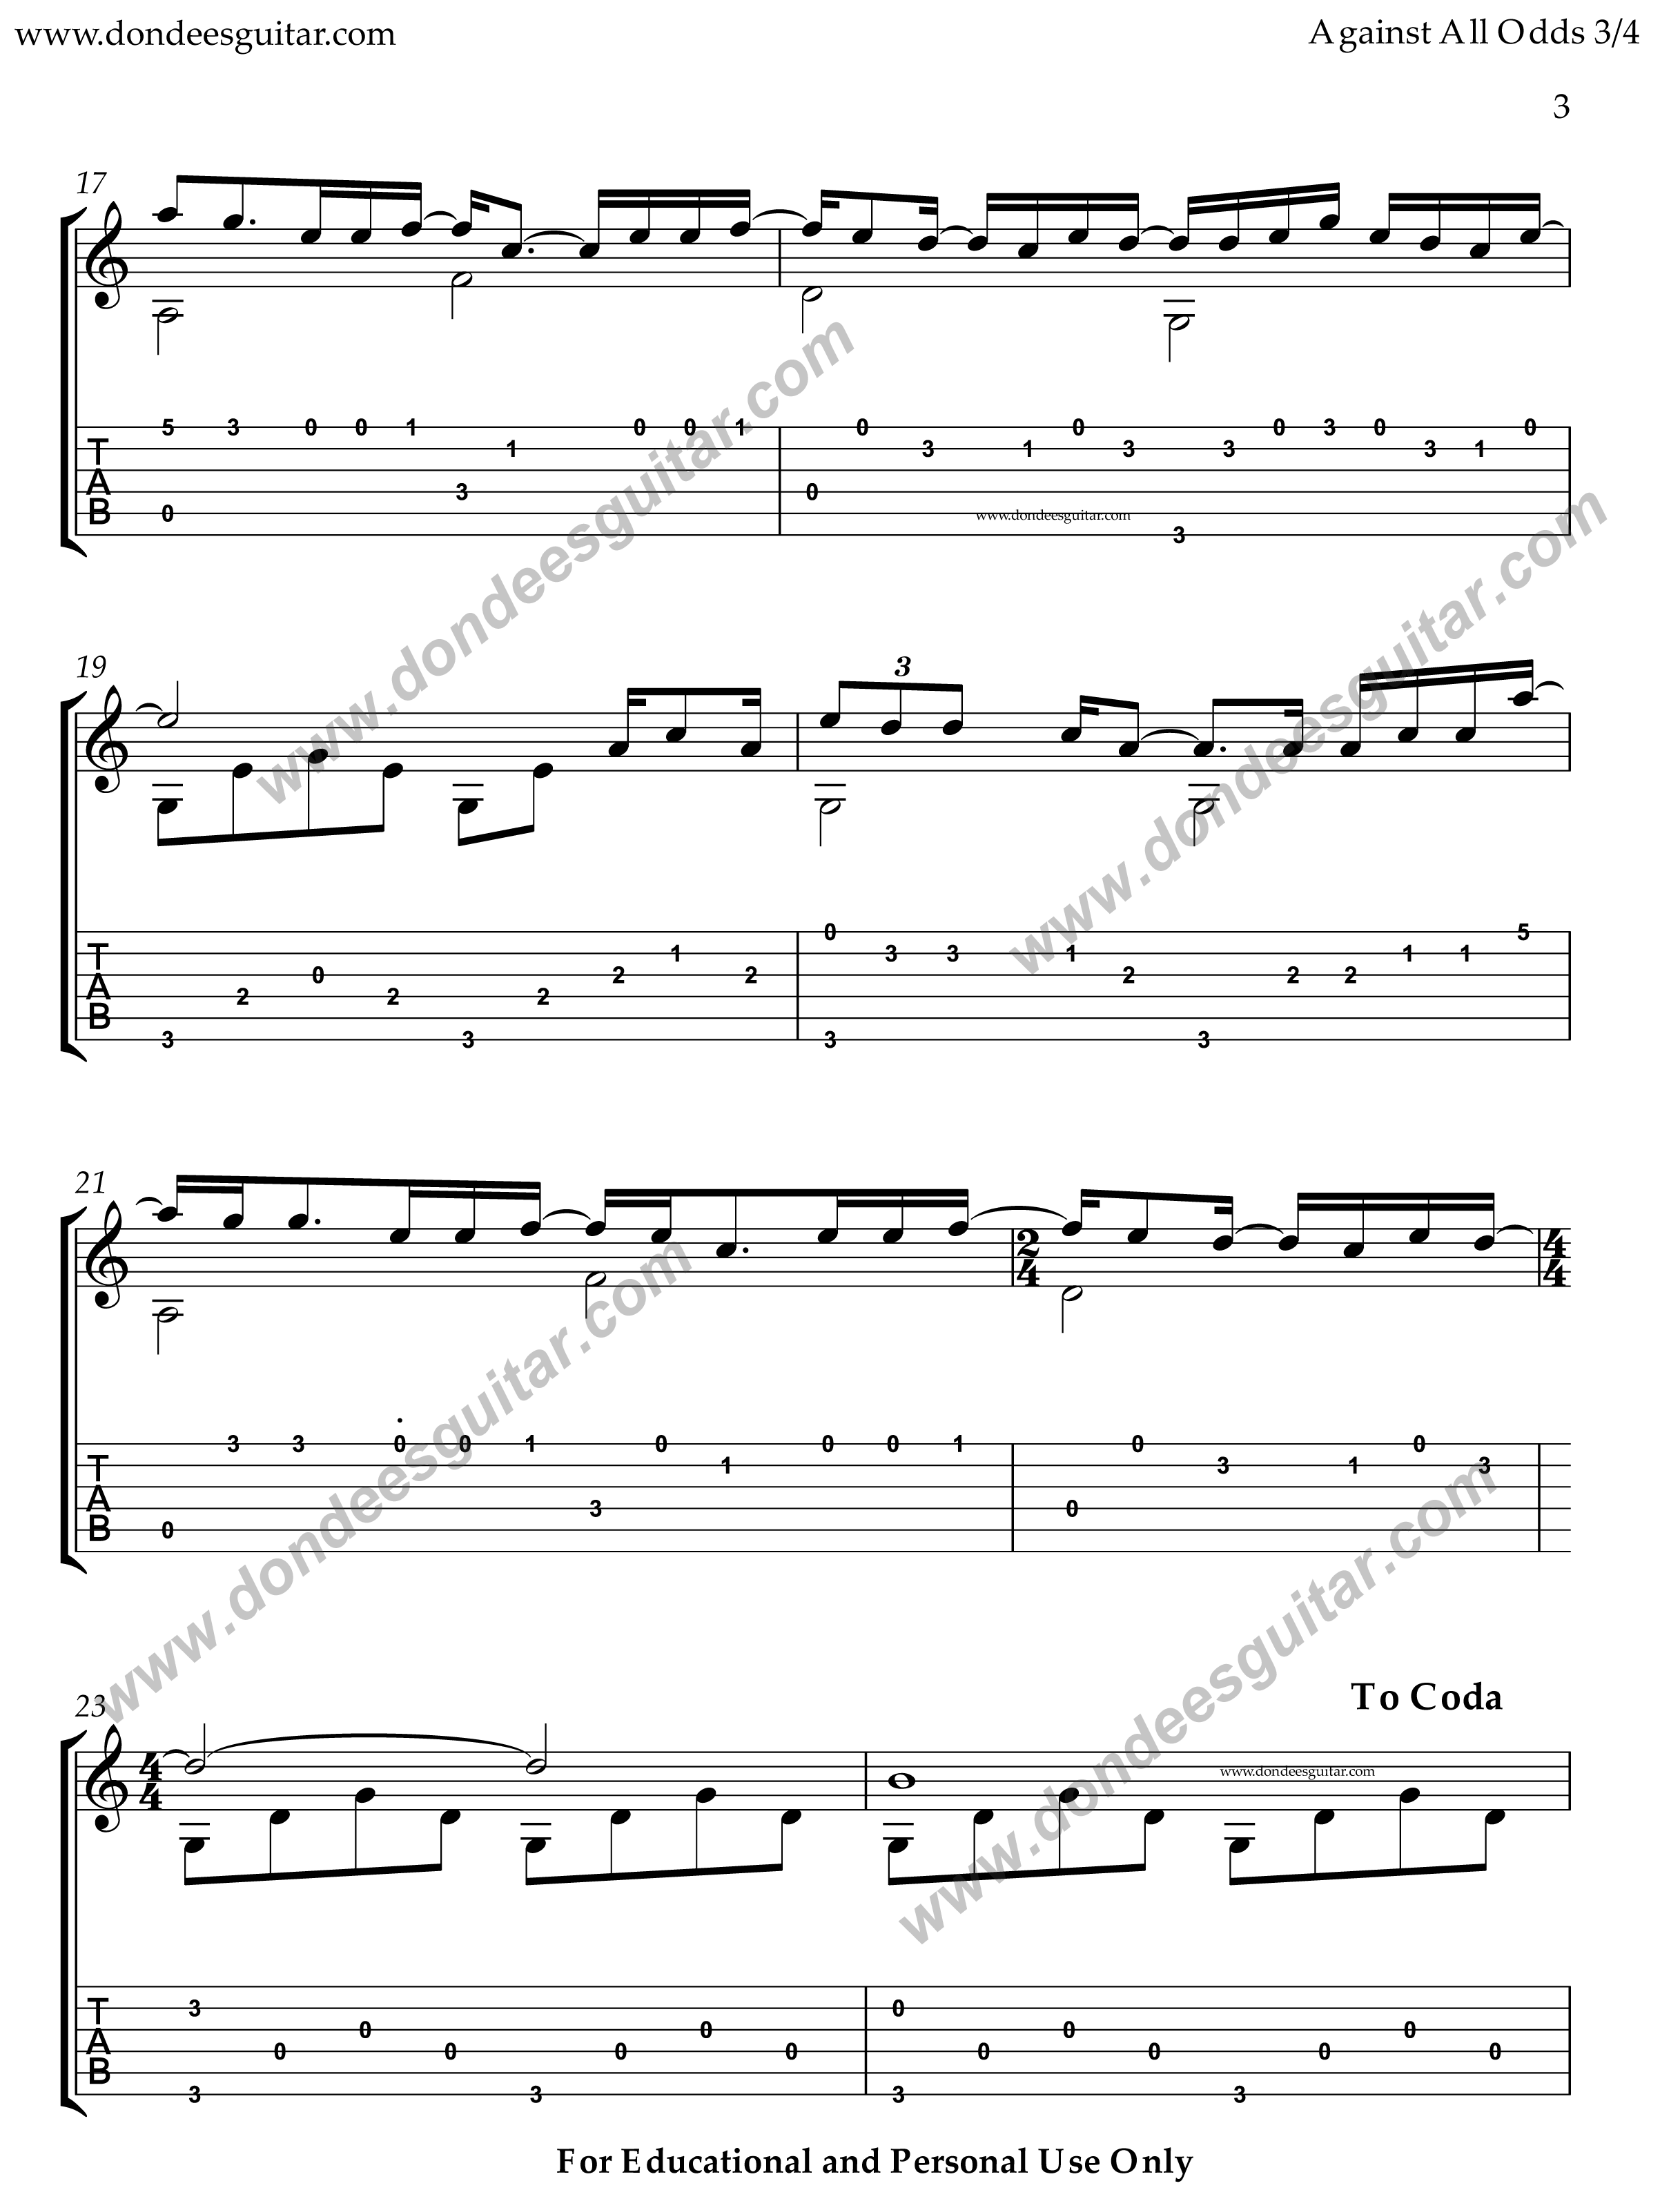 Against All Odds Fingerstyle Tabs